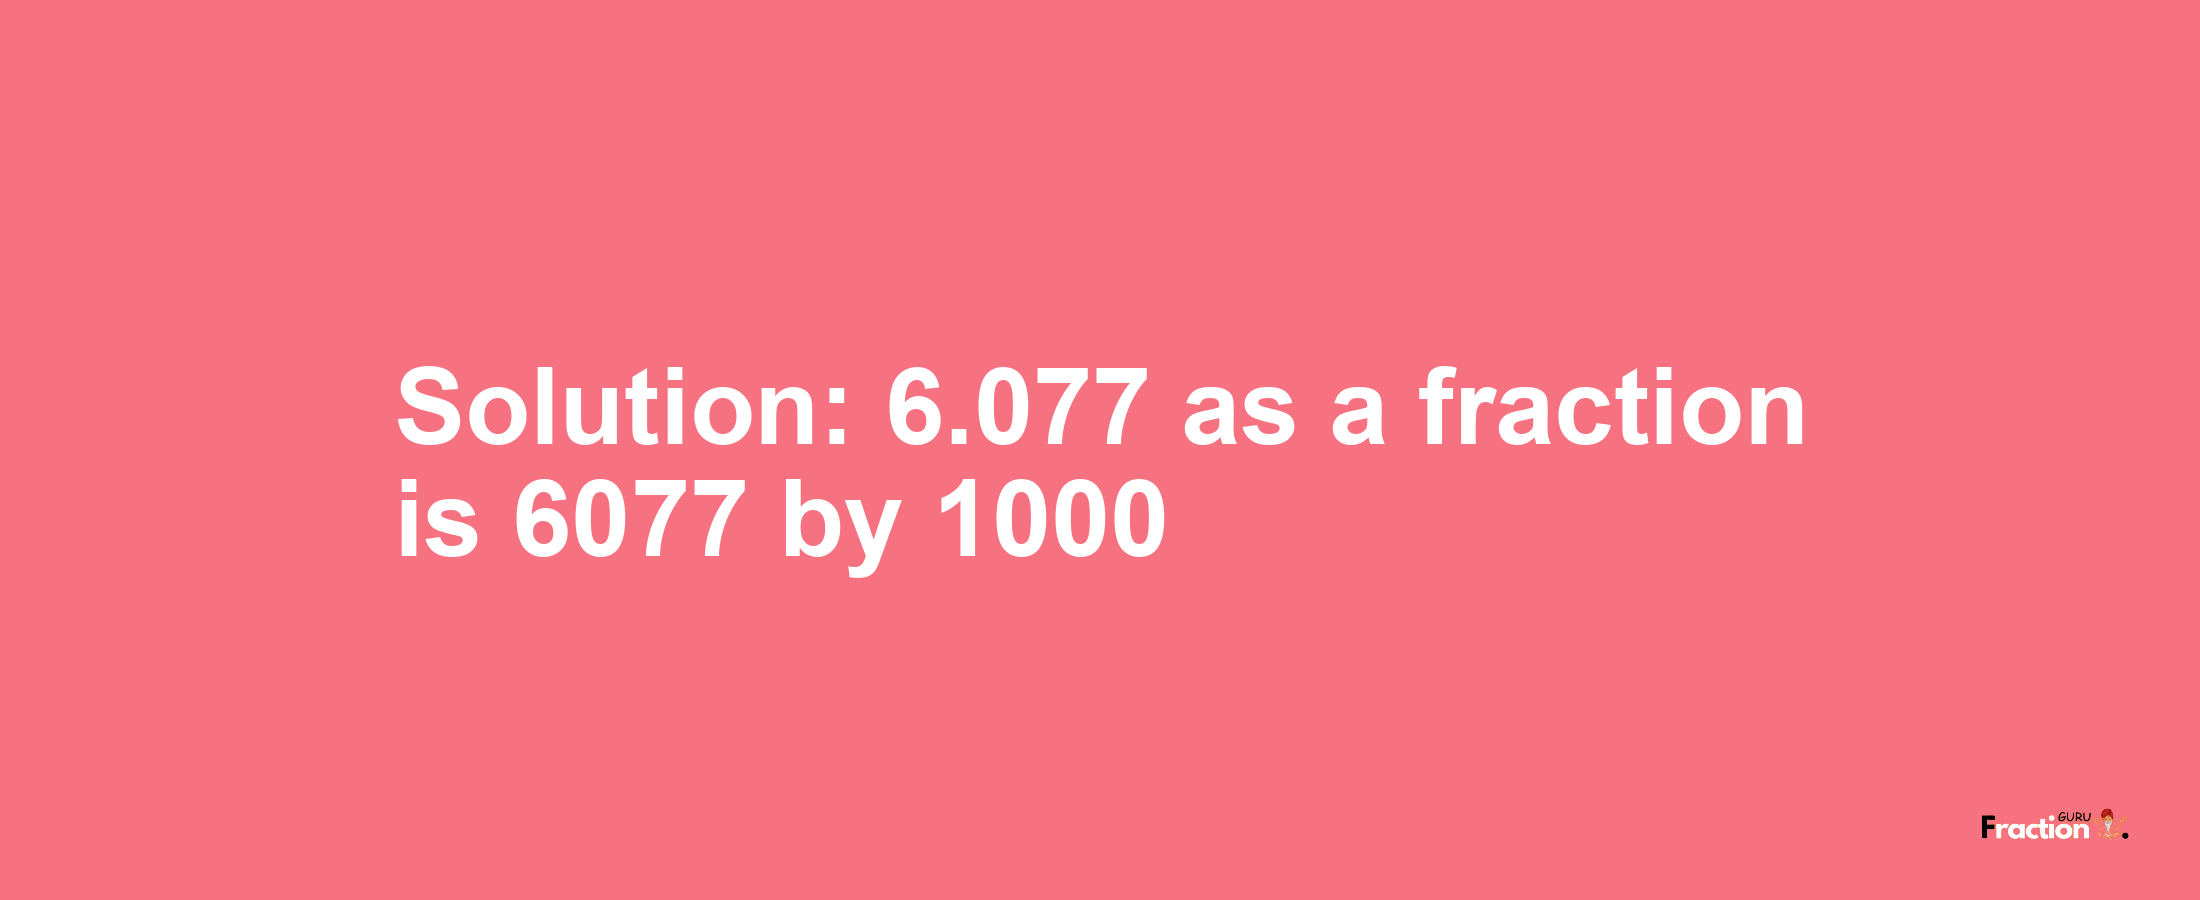 Solution:6.077 as a fraction is 6077/1000